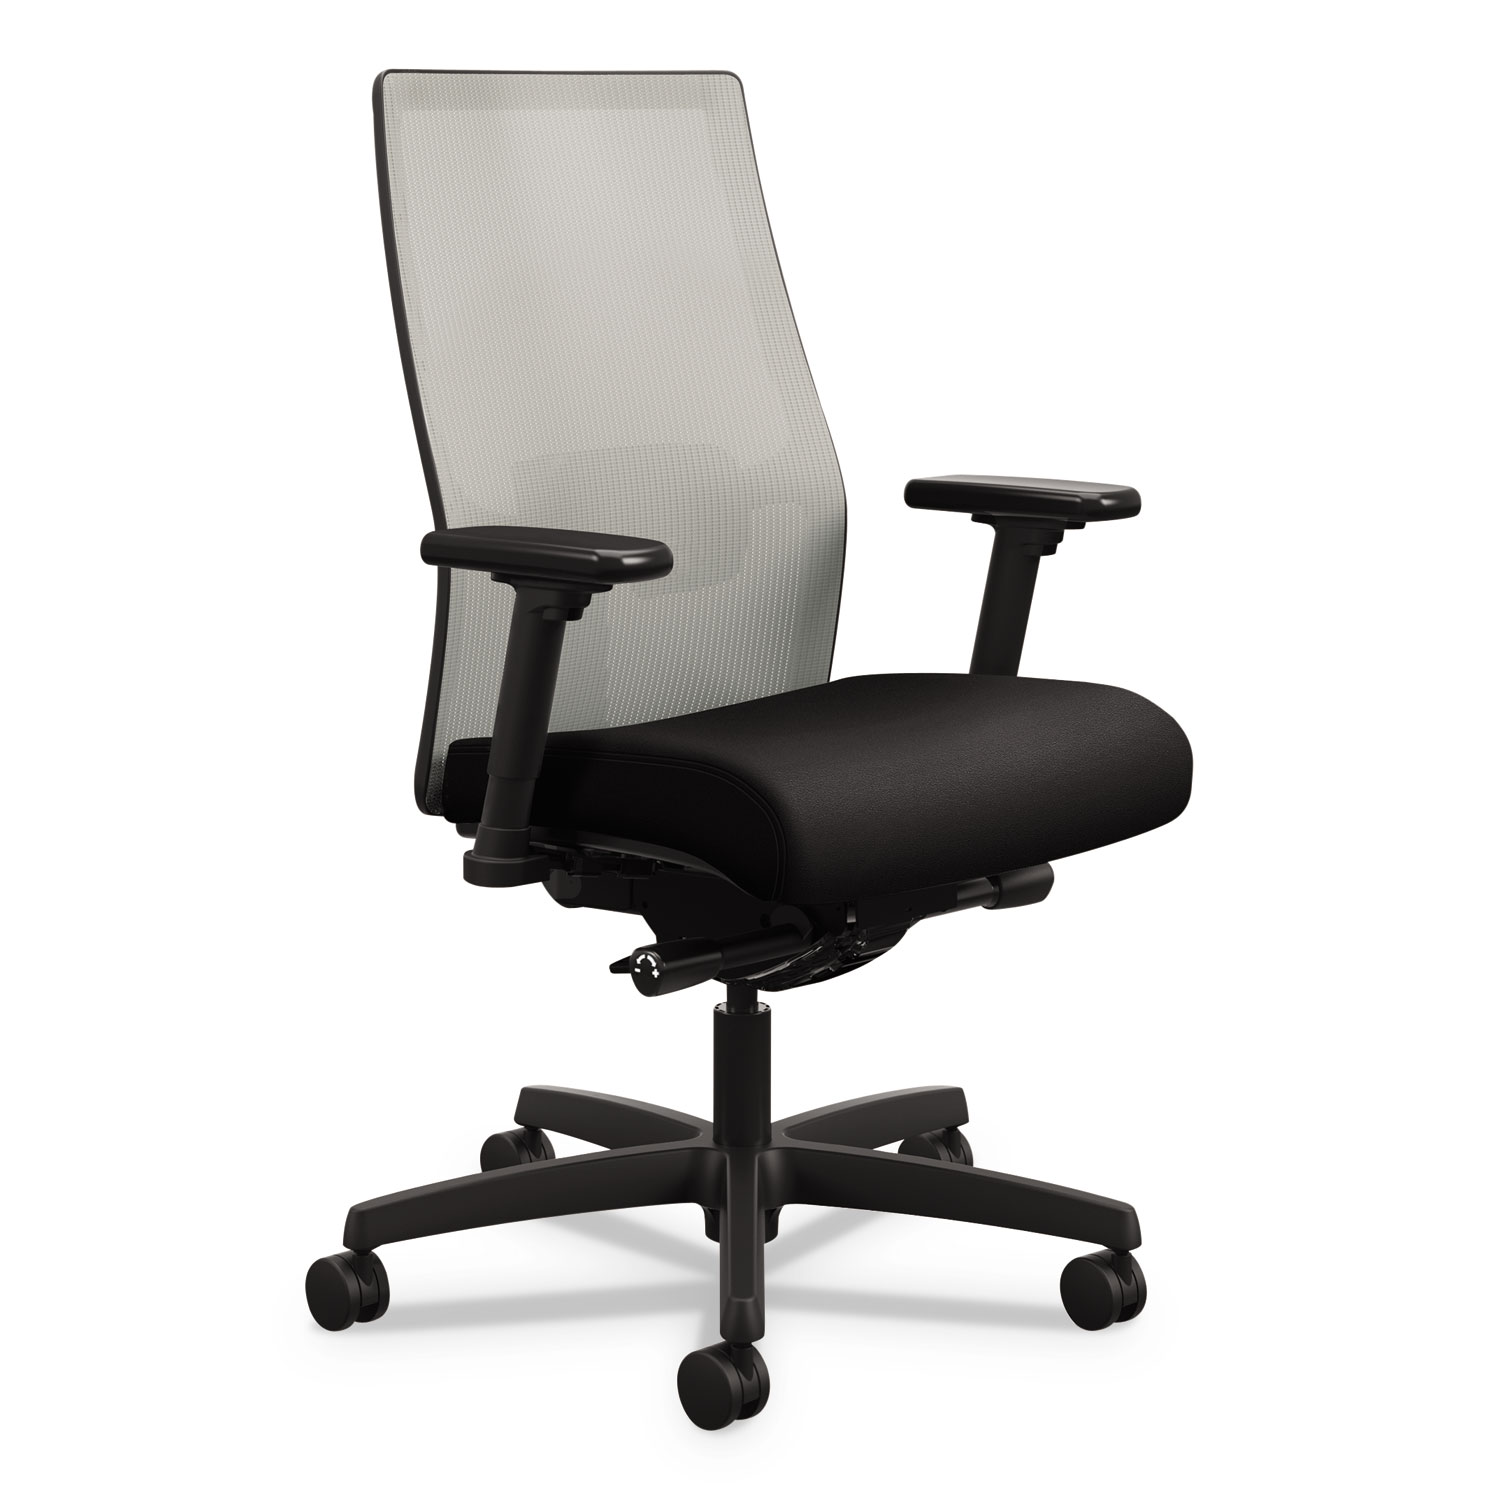  HON I2M2AFC10ATK Ignition 2.0 4-Way Stretch Mid-Back Mesh Task Chair, Supports up to 300 lbs., Black Seat, Fog Back, Black Base (HONI2M2AFC10ATK) 